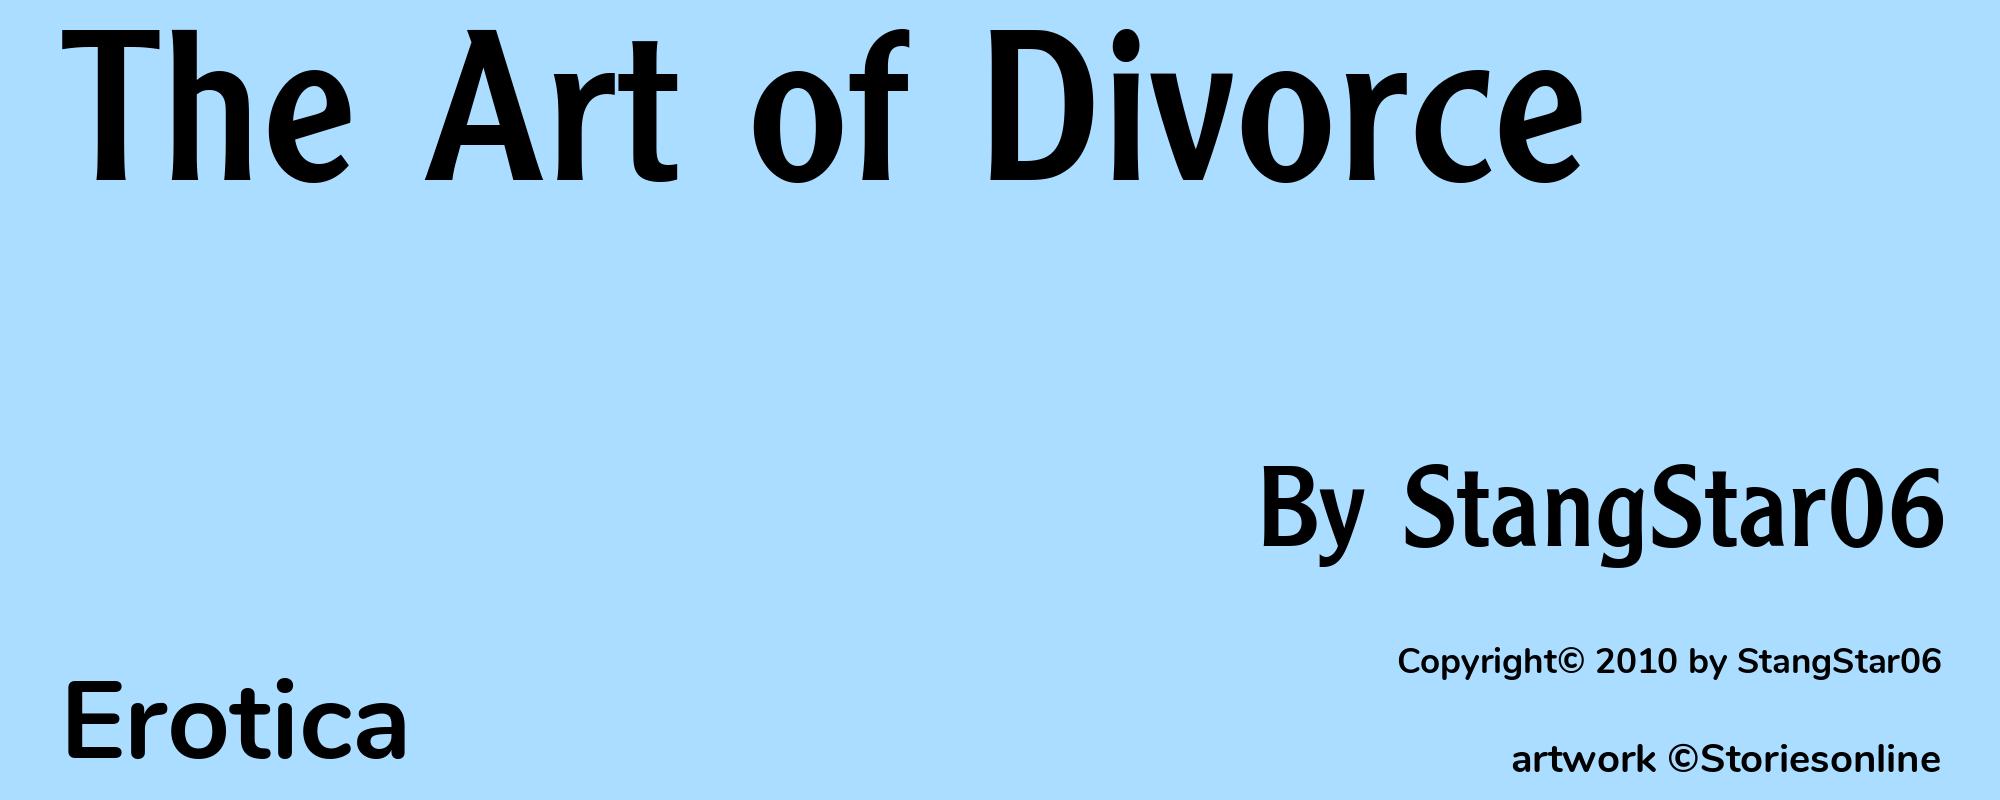 The Art of Divorce - Cover